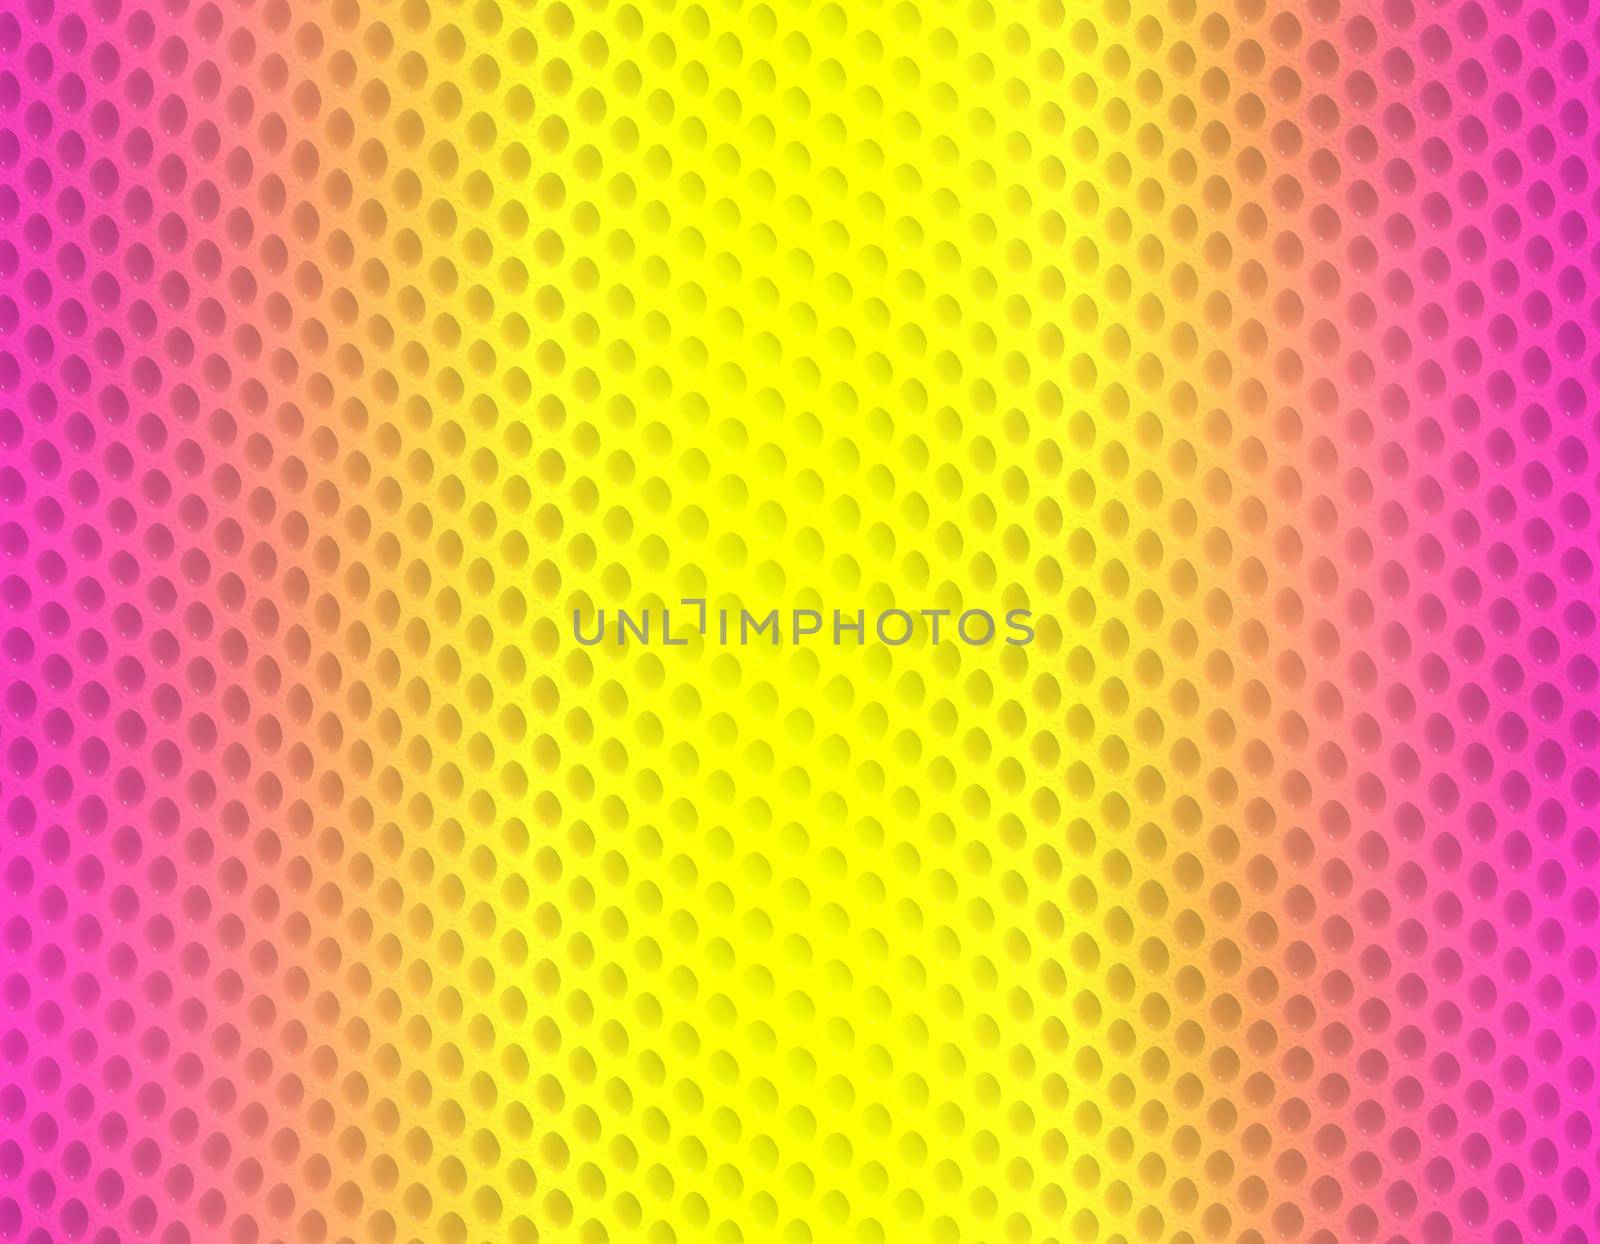 Magenta and yellow gradient snake skin seamless pattern, bubble scale